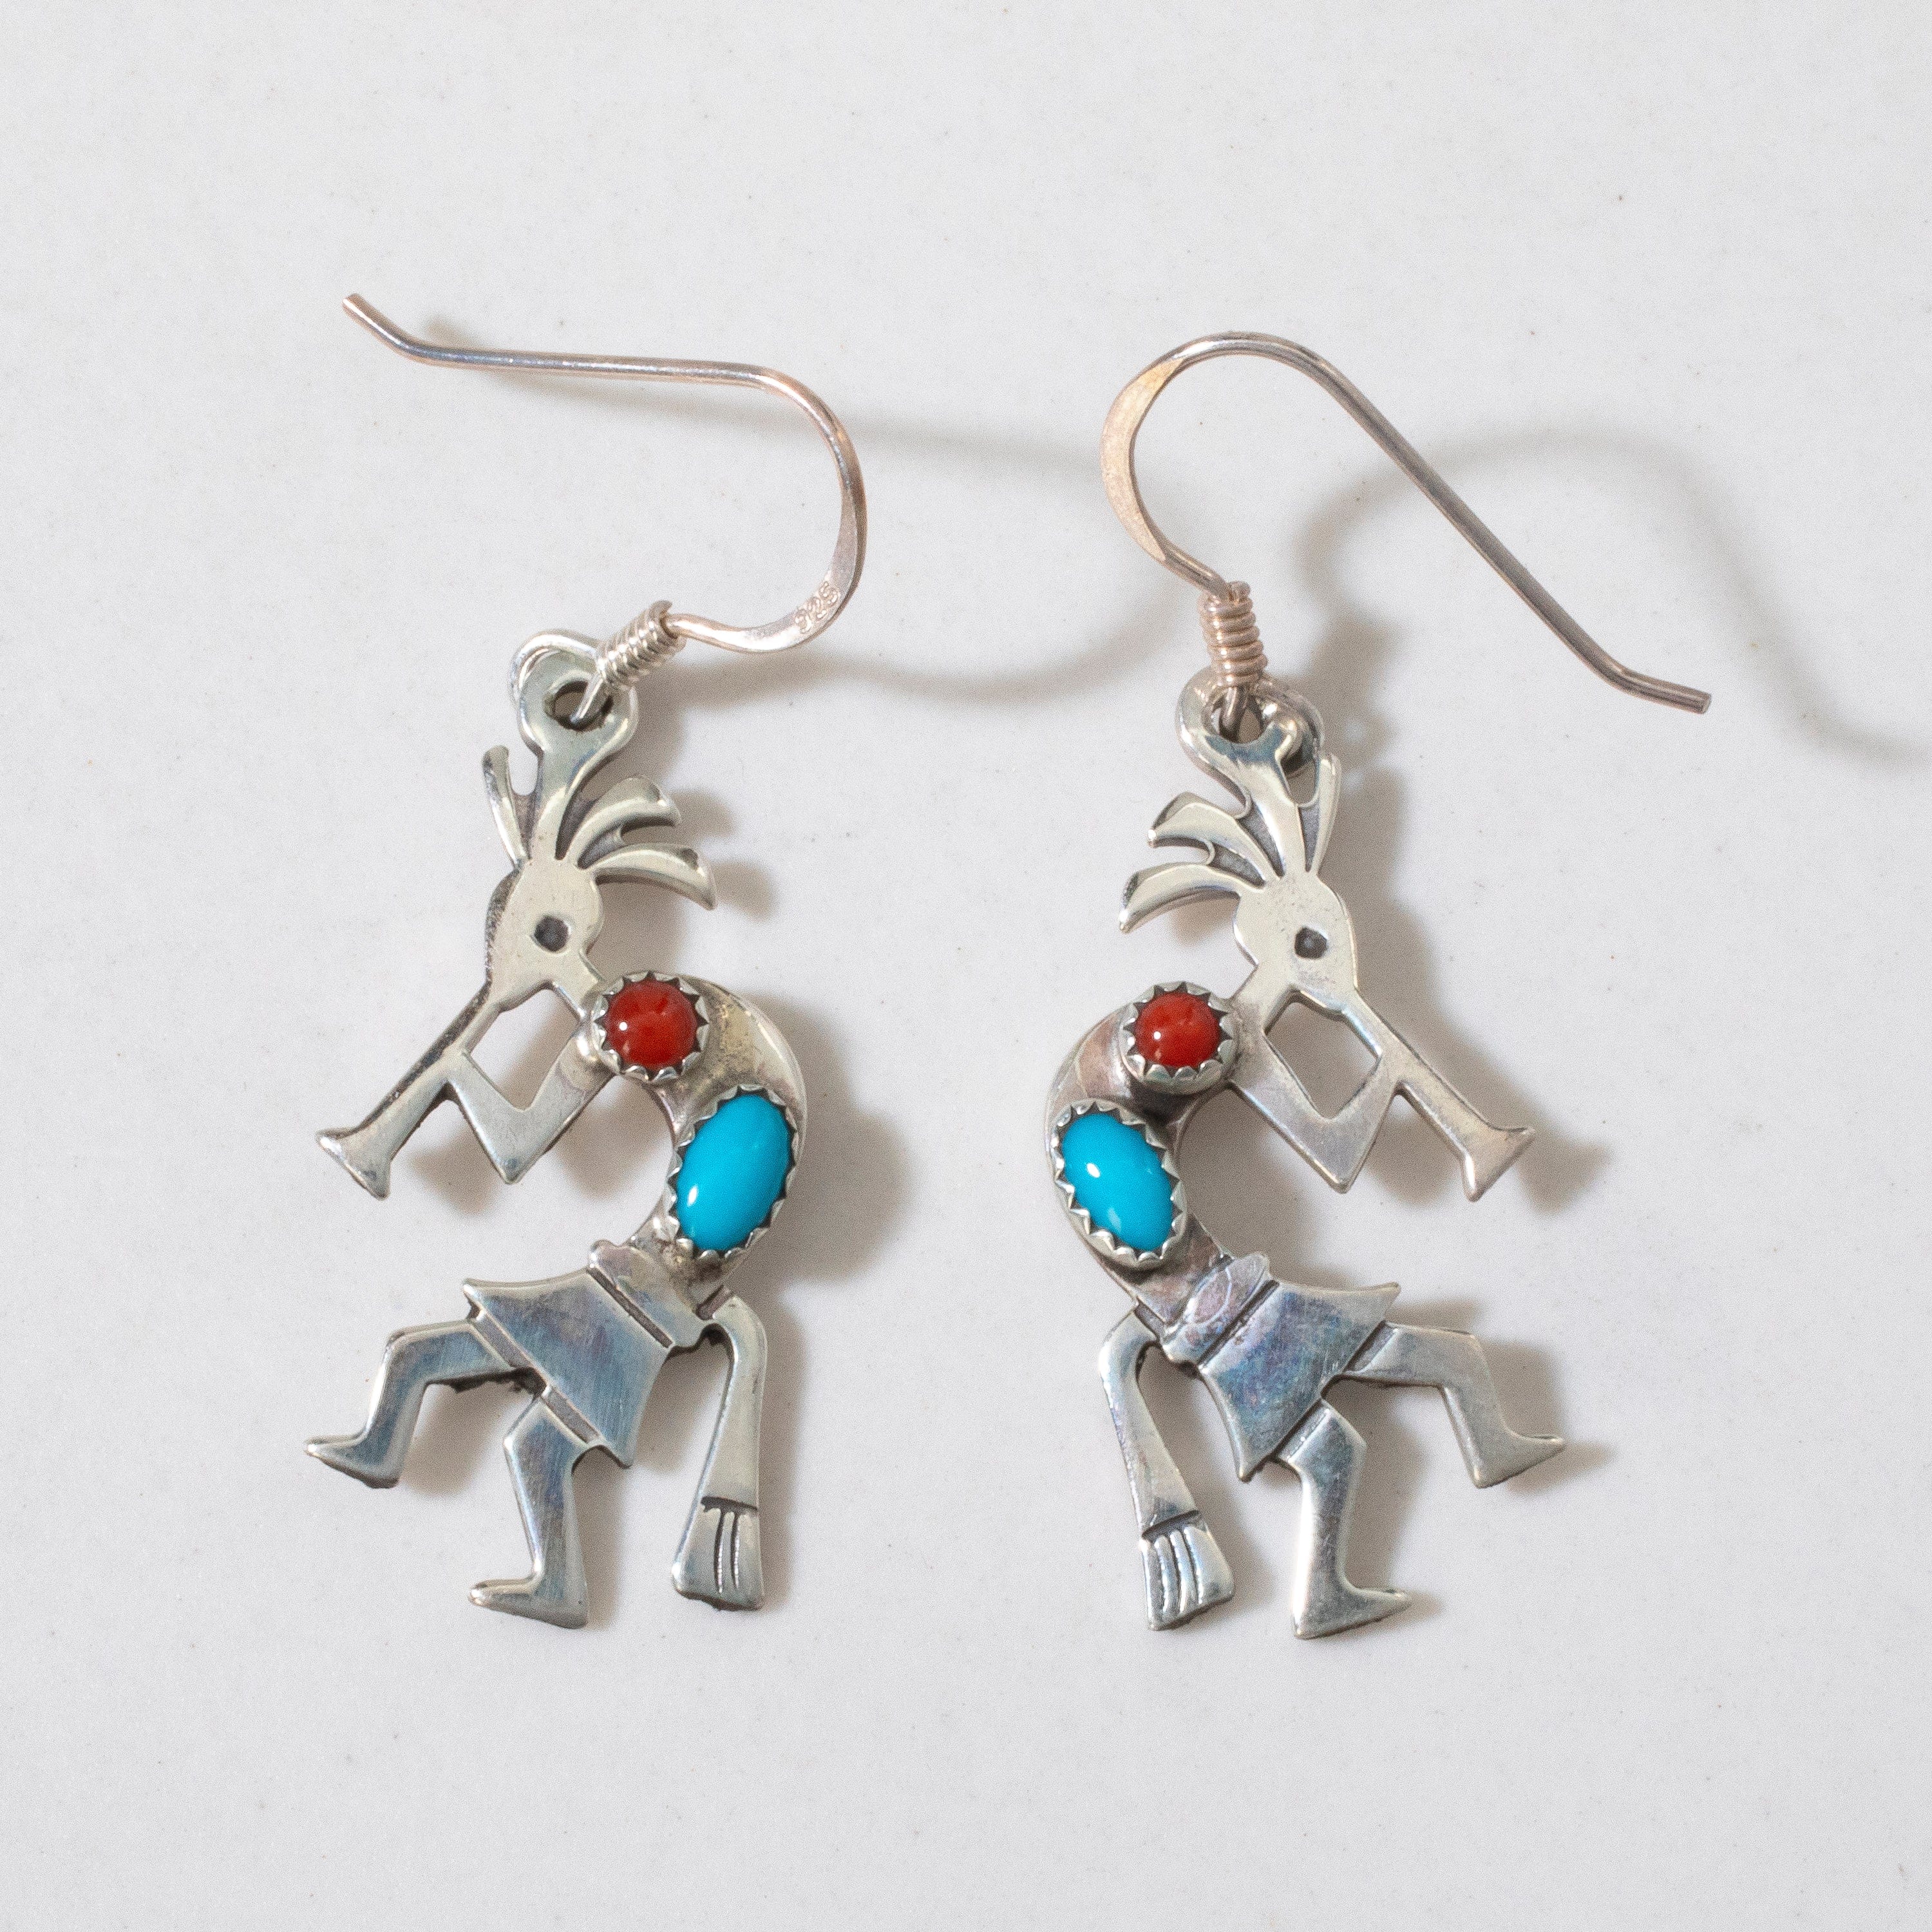 Kalifano Native American Jewelry Sleeping Beauty Turquoise & Red Coral Kokopelli Navajo USA Native American Made 925 Sterling Silver Earrings with French Hook NAE200.011